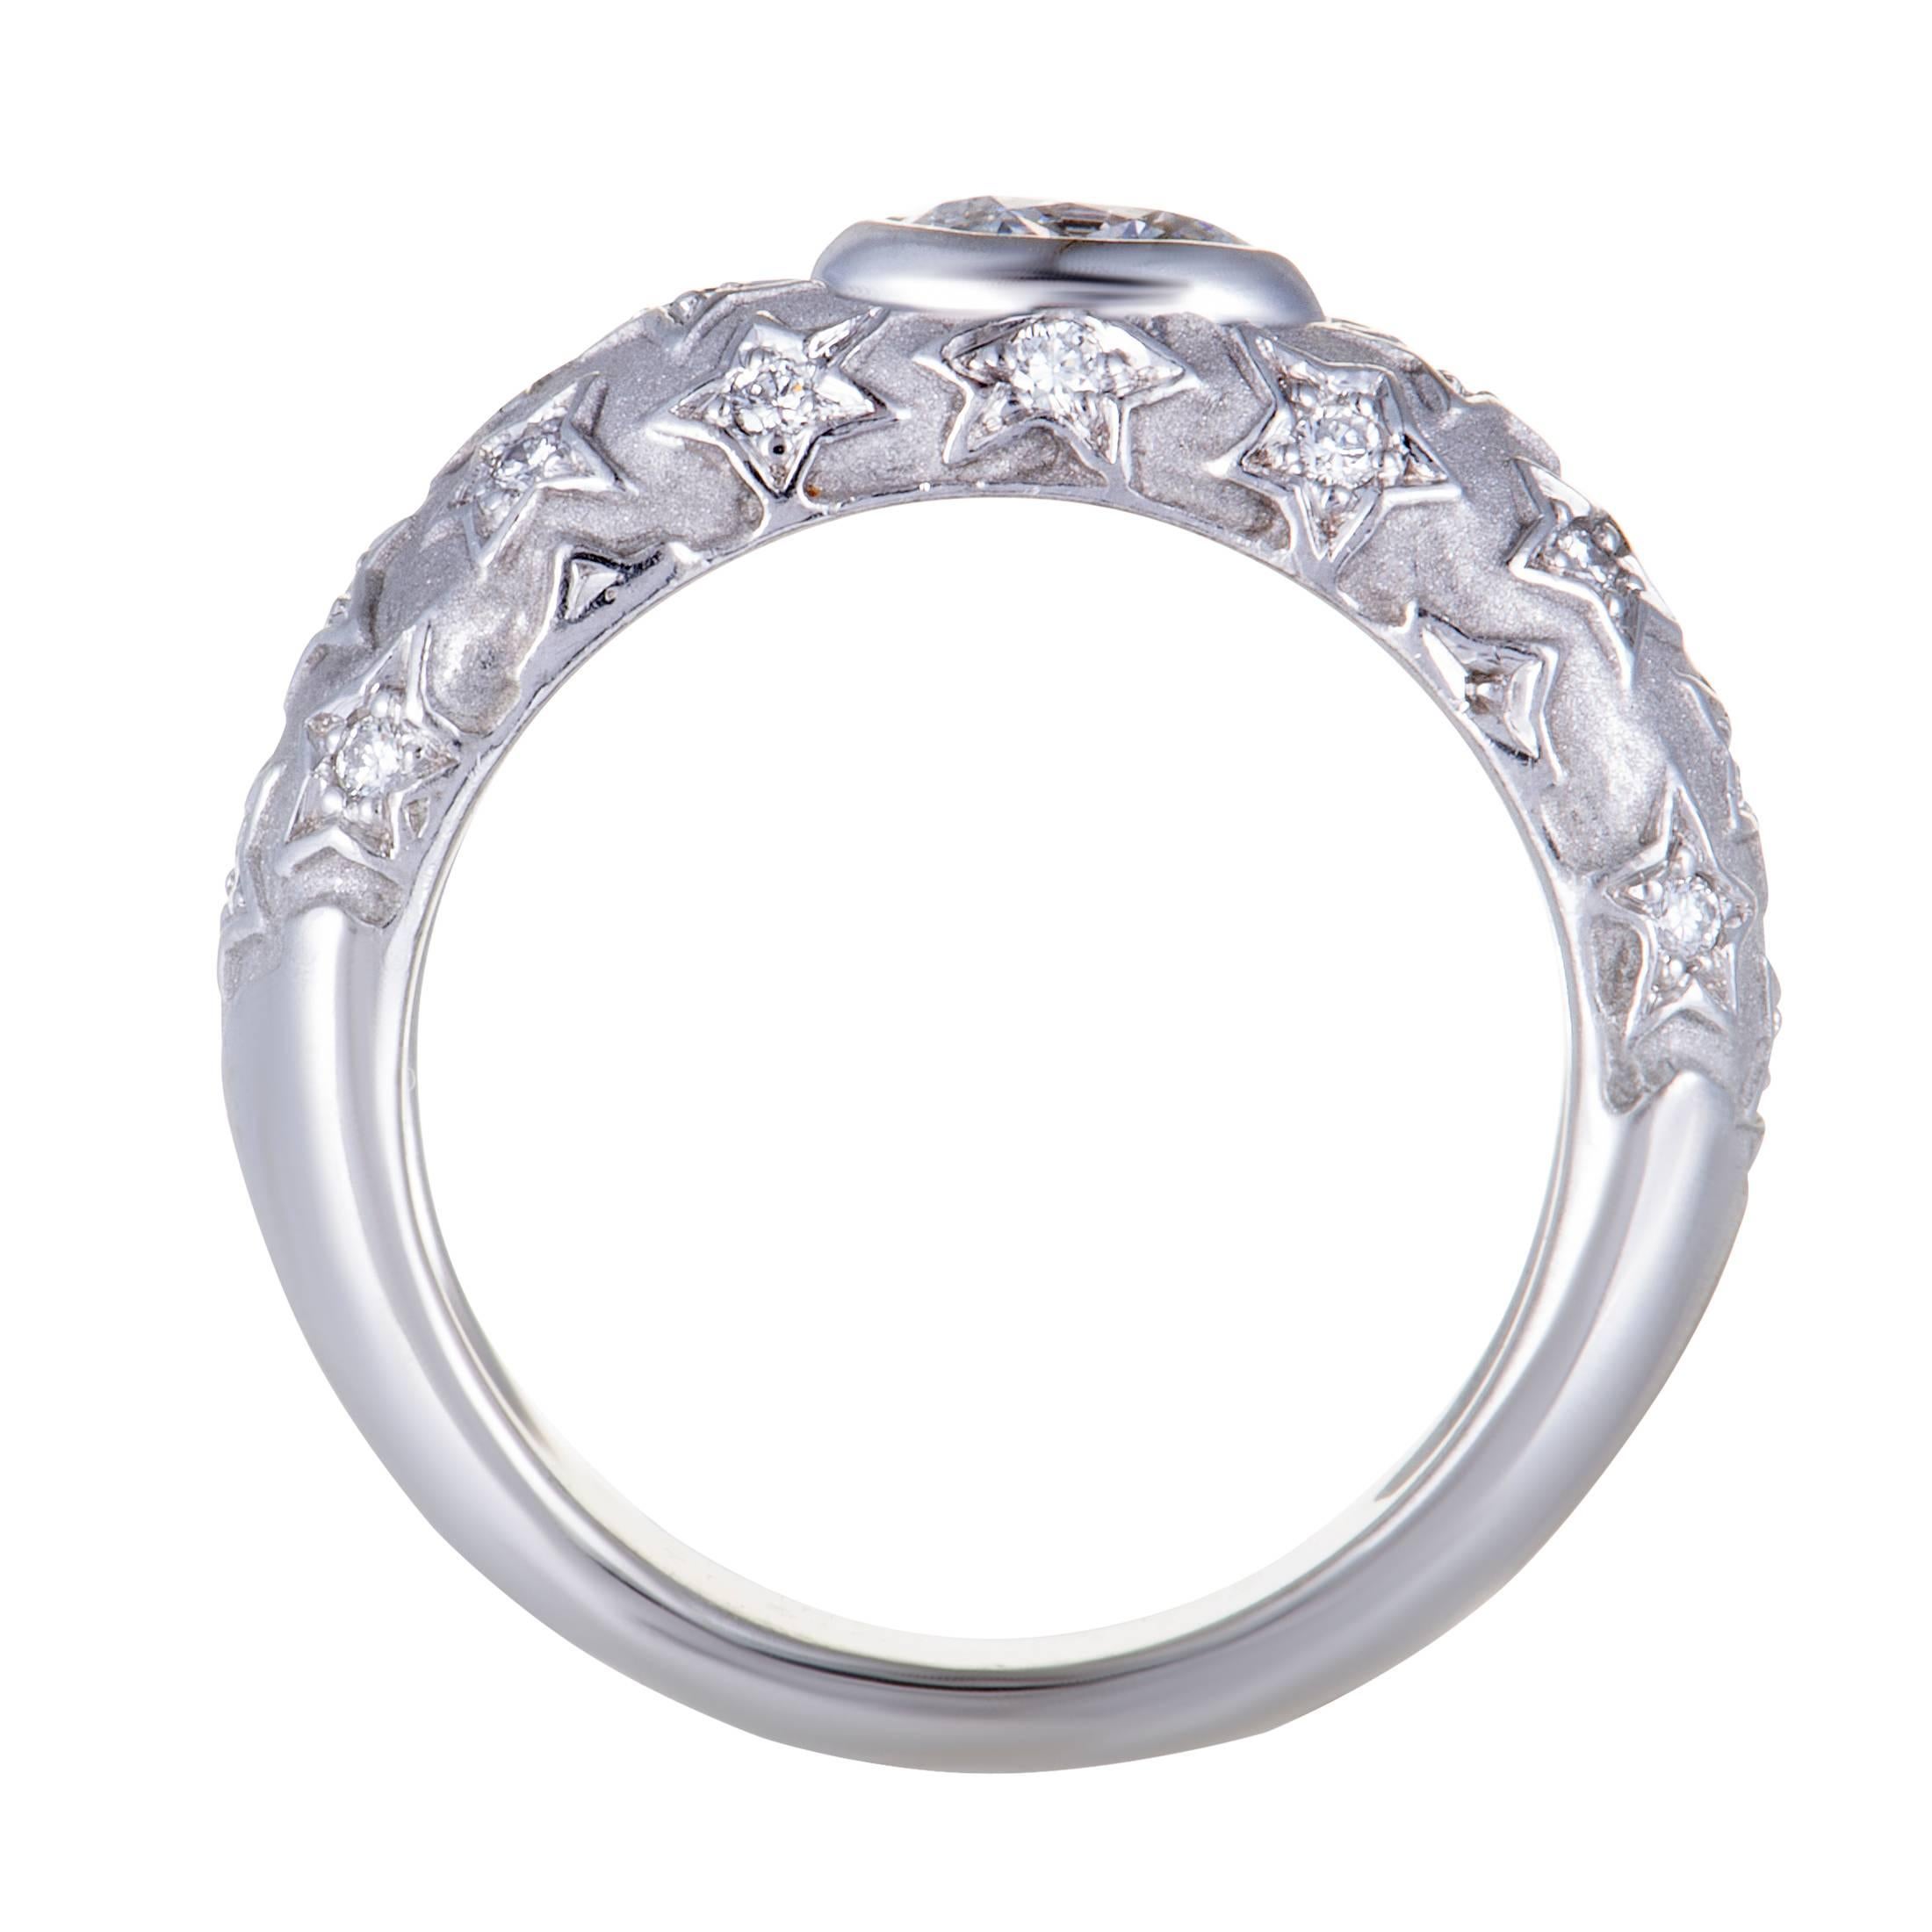 Offering a look of absolute prestige and elegance that Chanel pieces are renowned for, this gorgeous ring will splendidly accentuate your attire. Made of classy 18K white gold, the ring is set with resplendent diamond stones that weigh in total